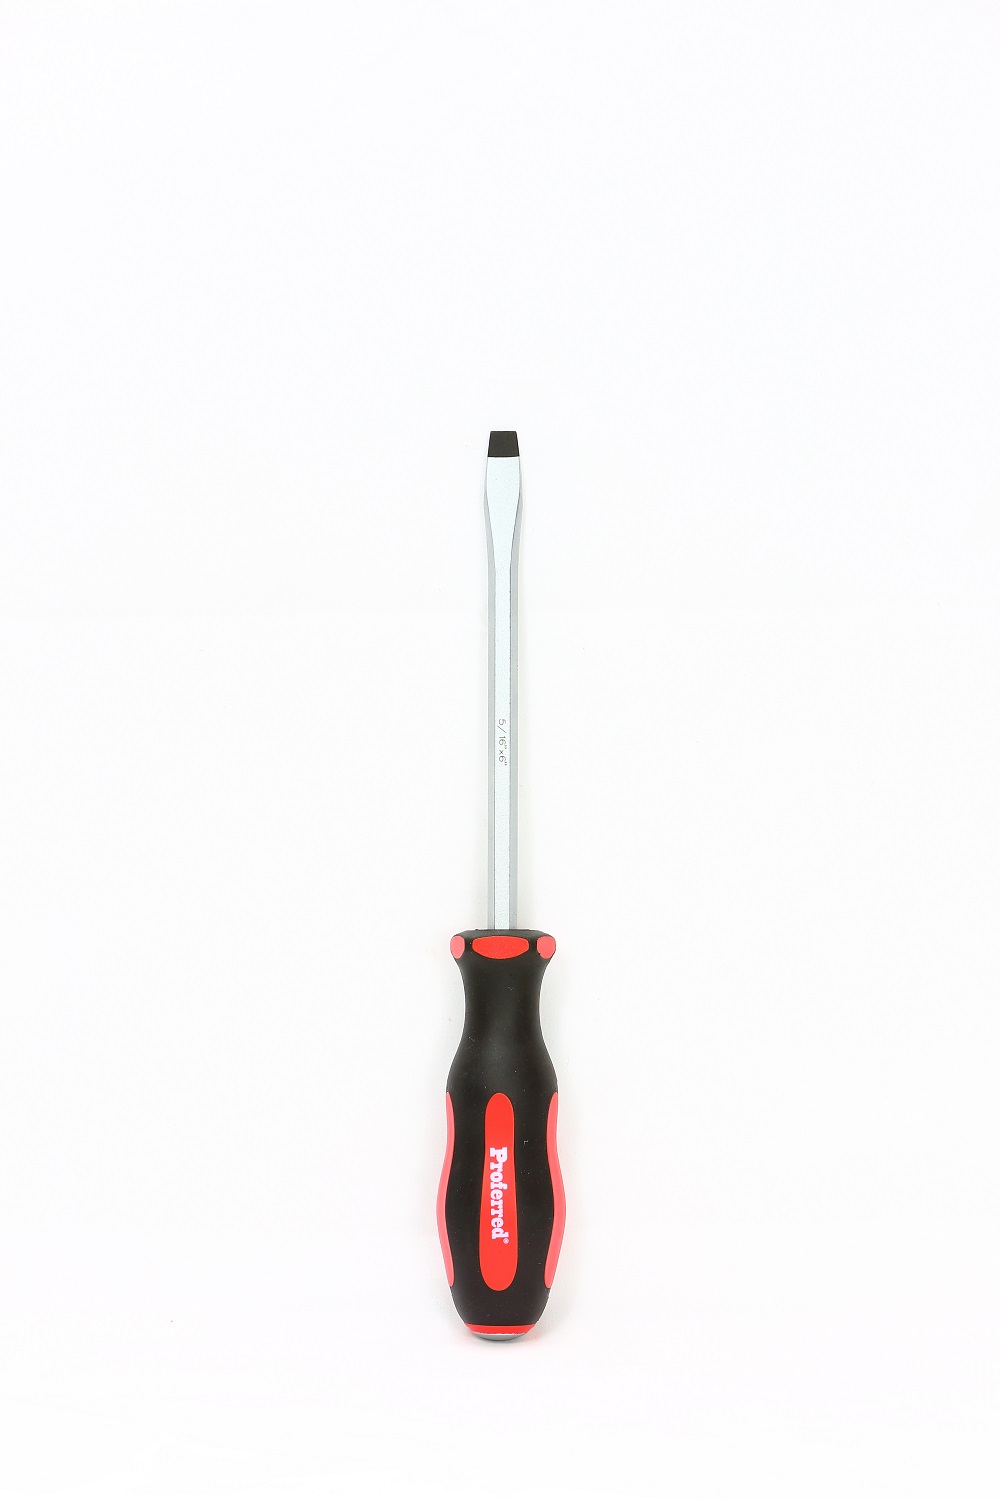 PROFERRED GO-THRU SCREWDRIVER SLOTTED 5/16''X6'' RED HANDLE 